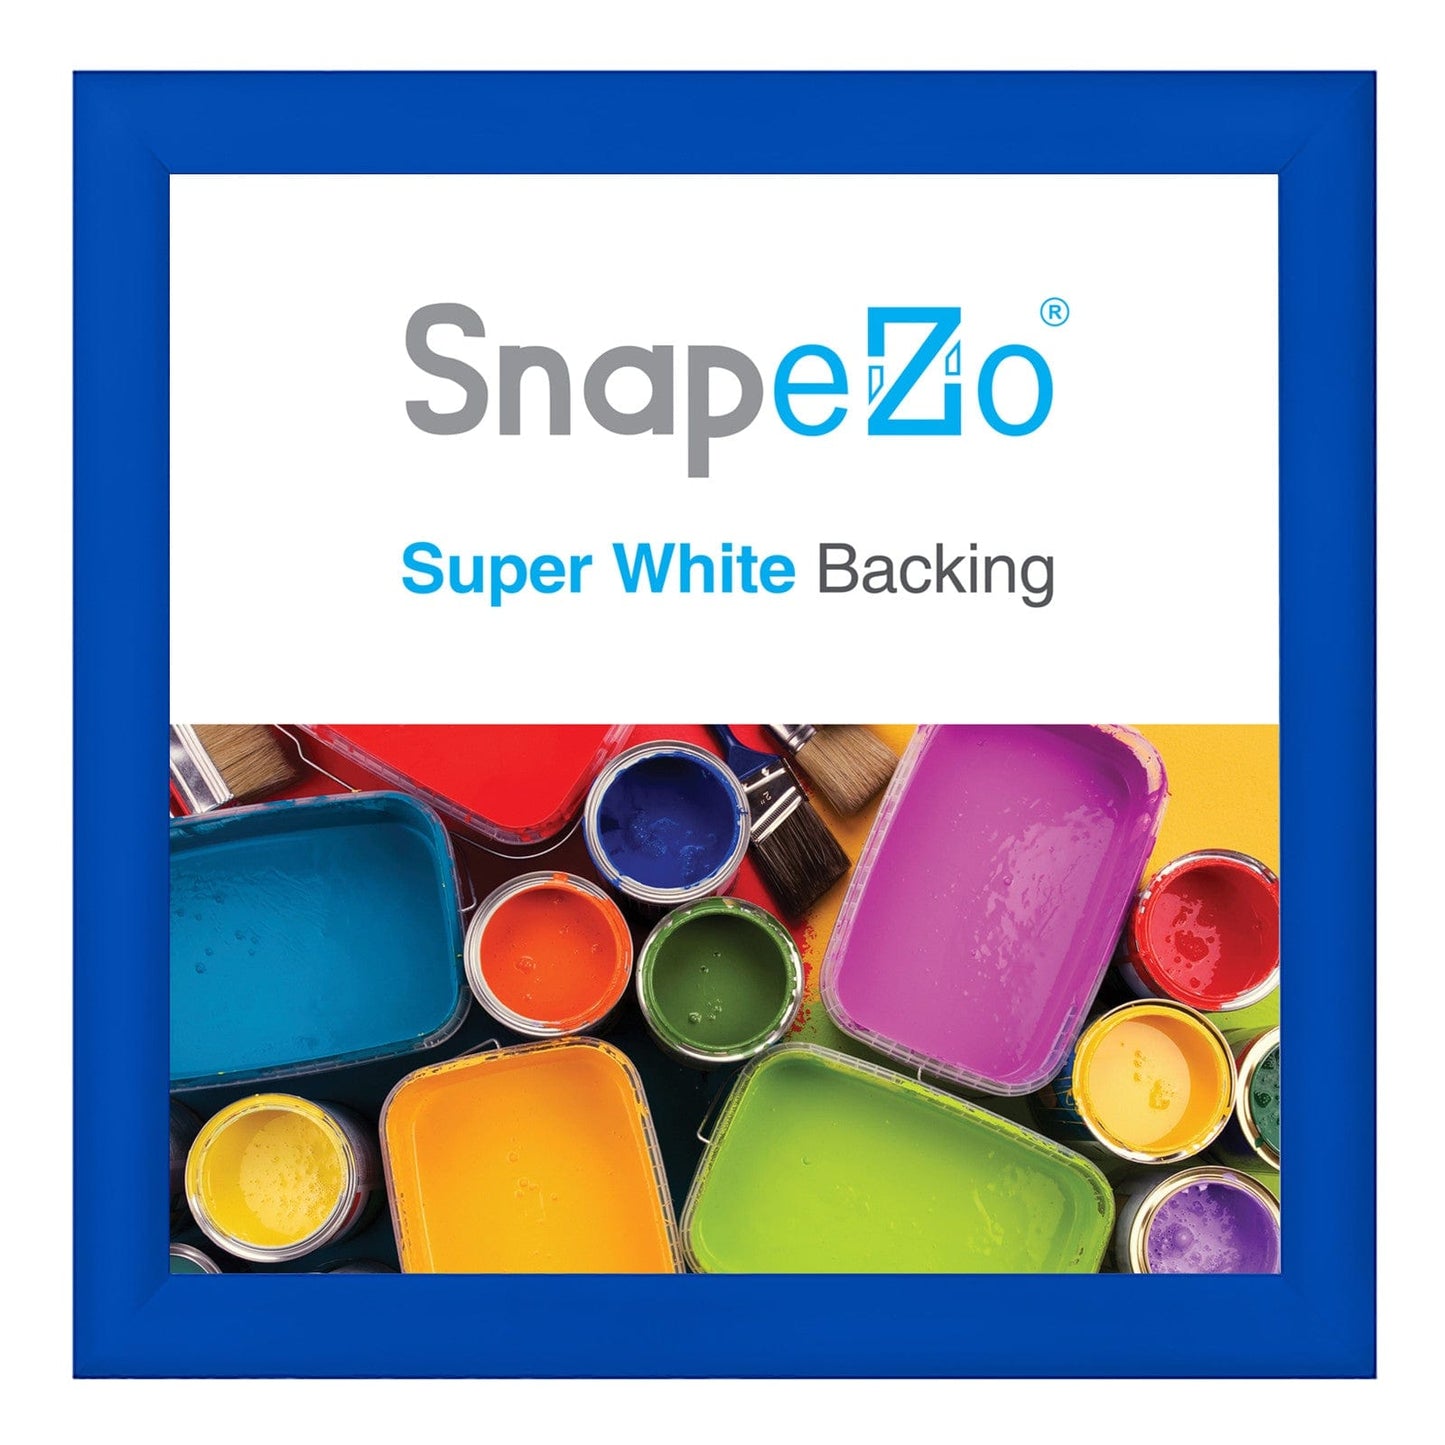 25x25 Blue SnapeZo® Snap Frame - 1.2" Profile - Snap Frames Direct